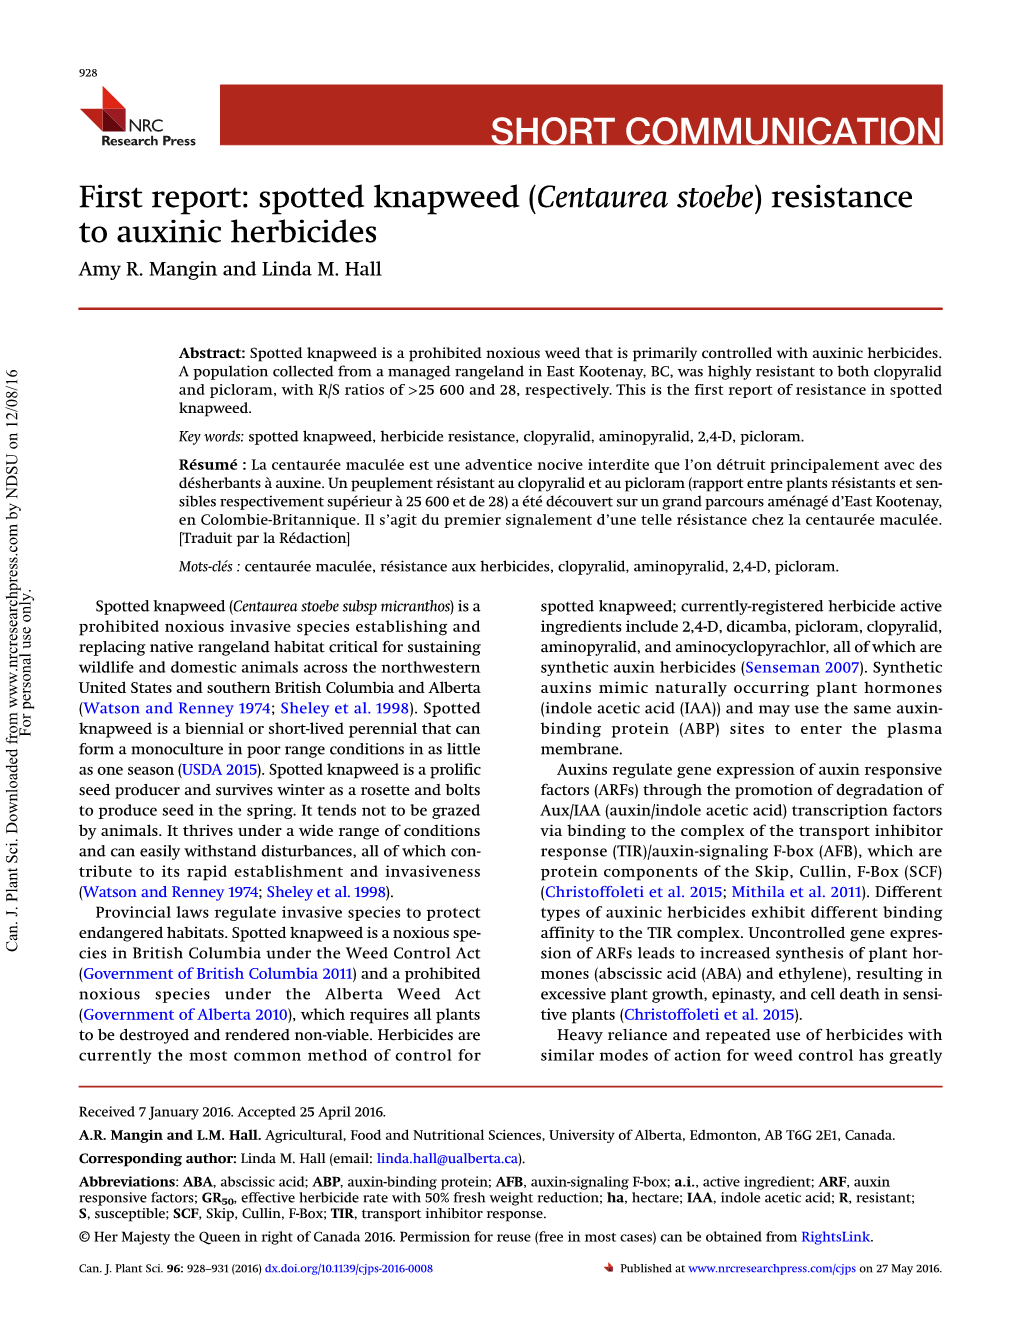 First Report: Spotted Knapweed (Centaurea Stoebe) Resistance to Auxinic Herbicides Amy R